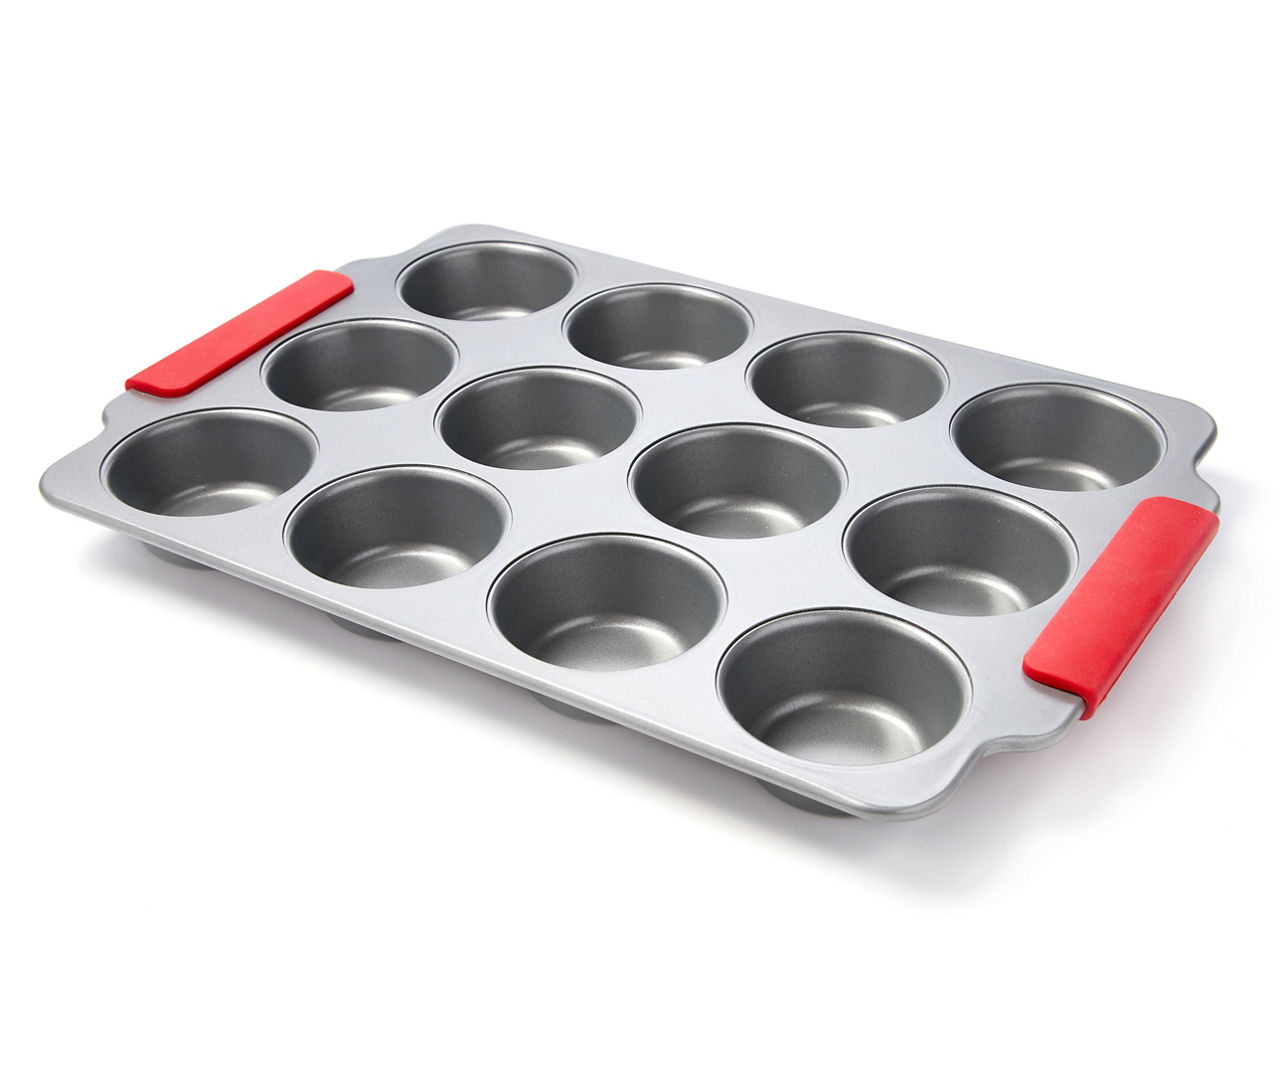 12 Cup Silicone Muffin Pan for Baking BPA Free - Bed Bath & Beyond